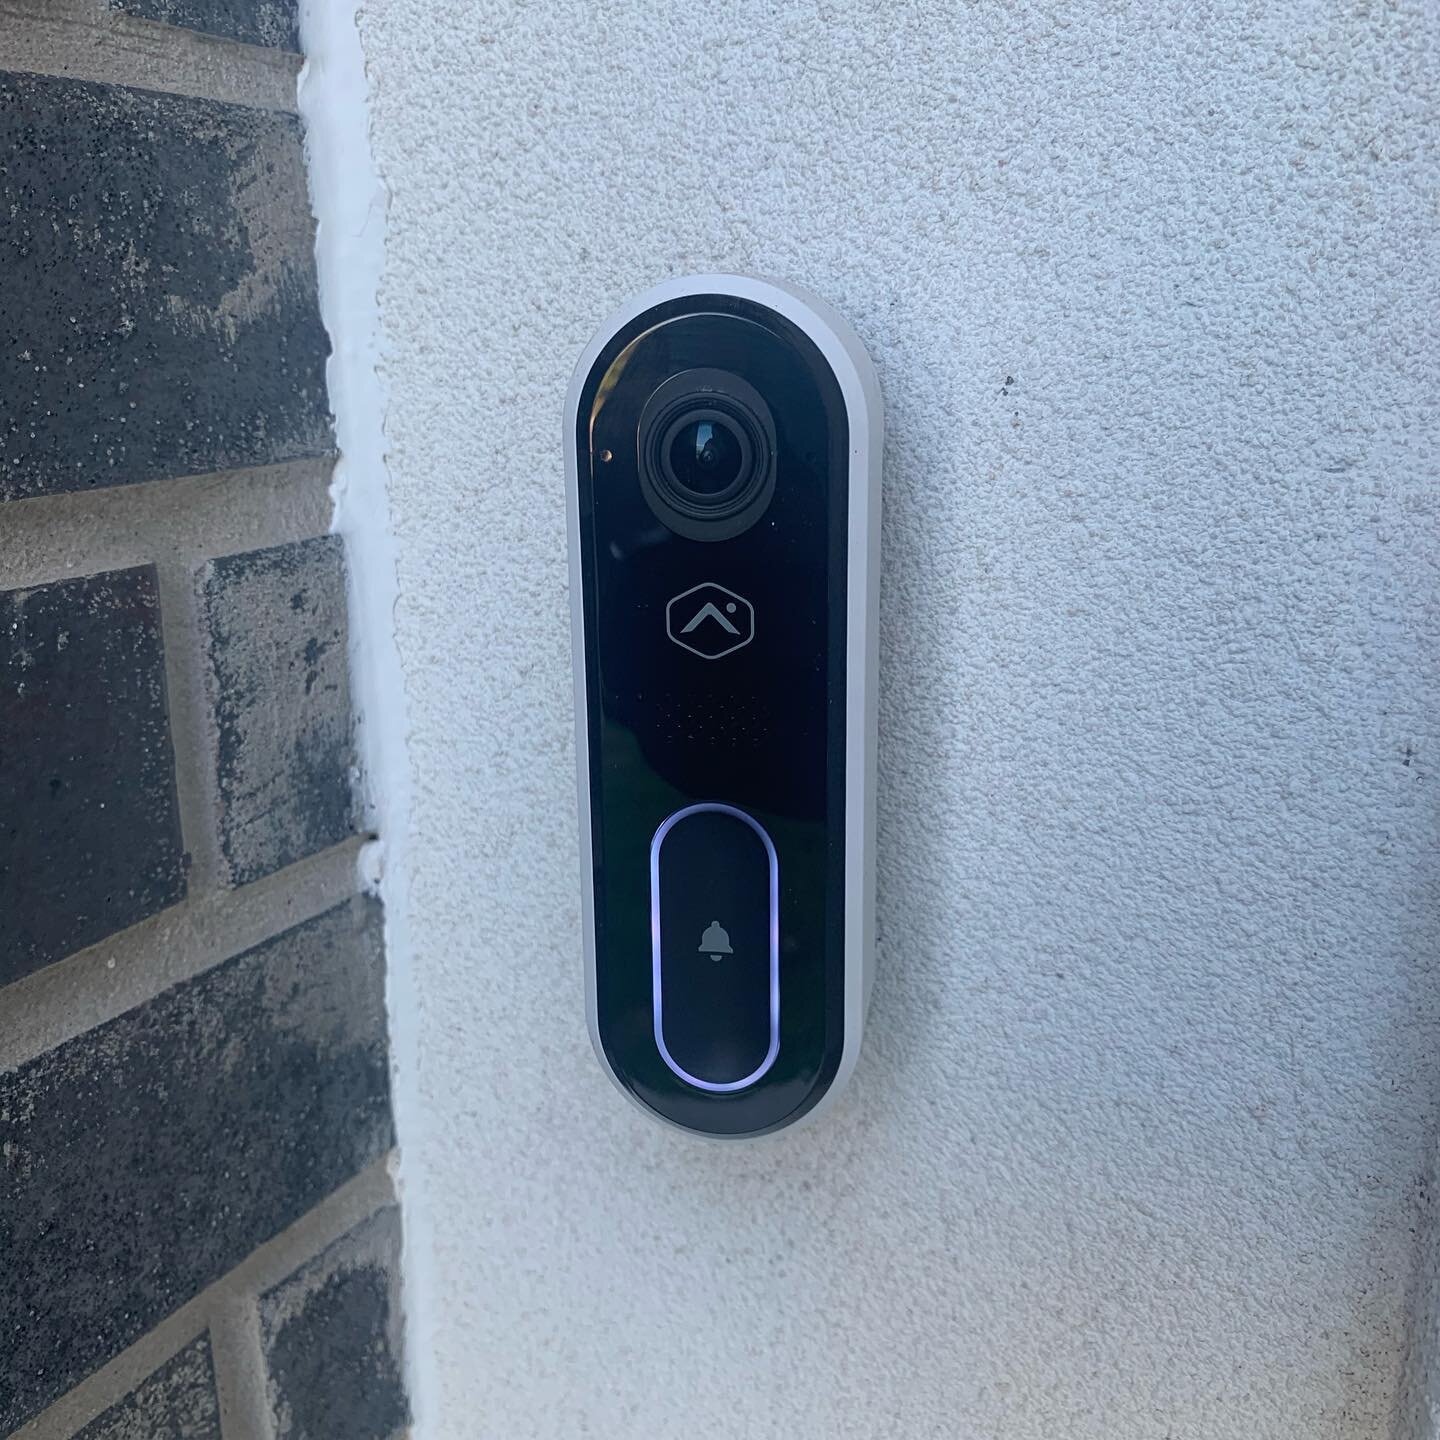 With Alarm.com you can control and automate so much and if you have a new home there are probably some products that are installed that already have the capability of integrating with Alarm.com. This customer has security, video doorbell, door lock, 